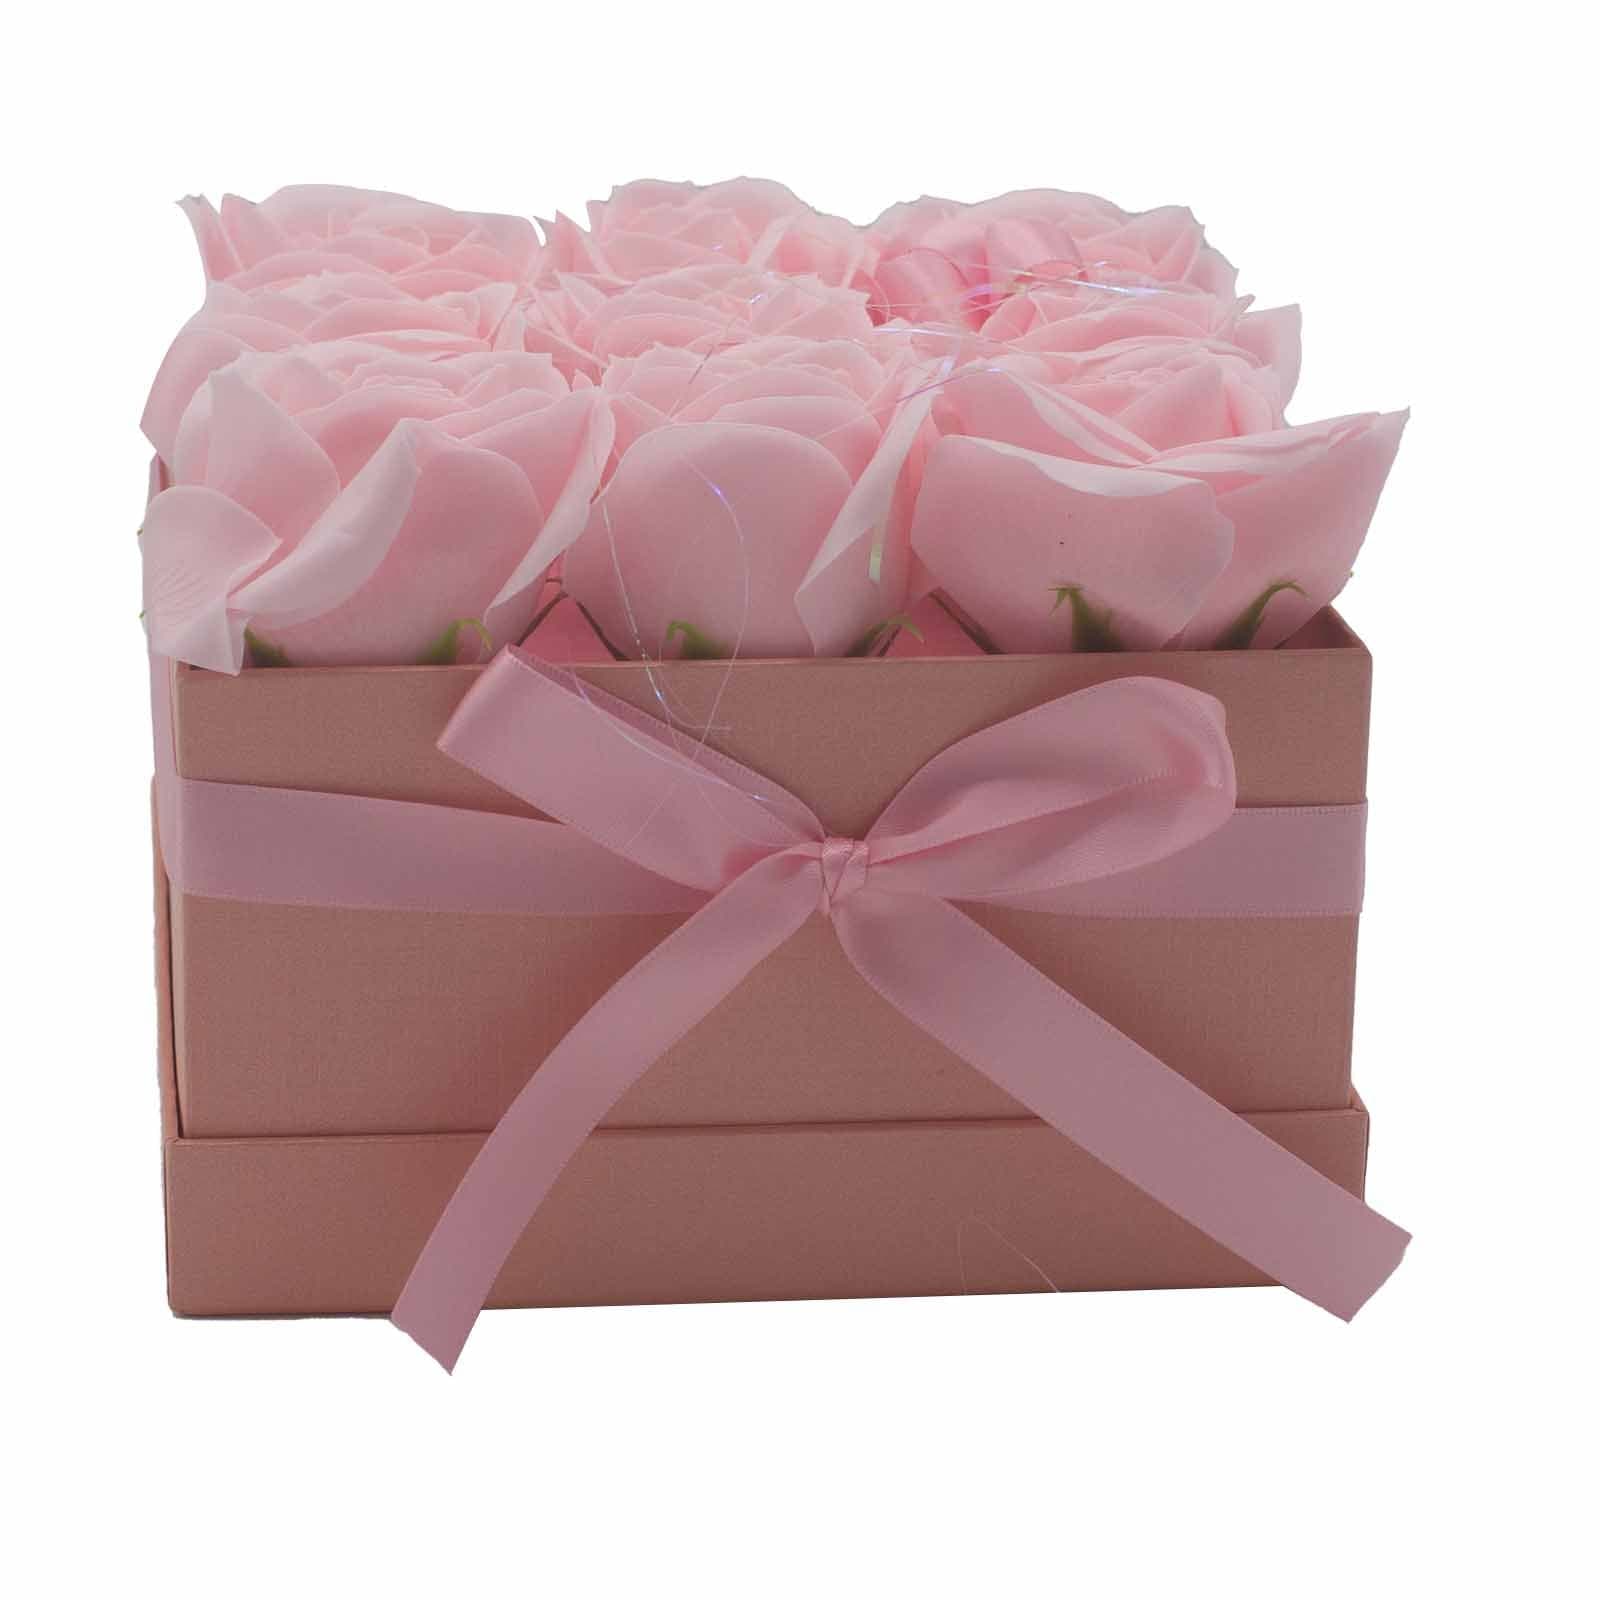 Soap Flower Gift Bouquet - 9 Pink Roses - Square - best price from Maltashopper.com GSFB-04